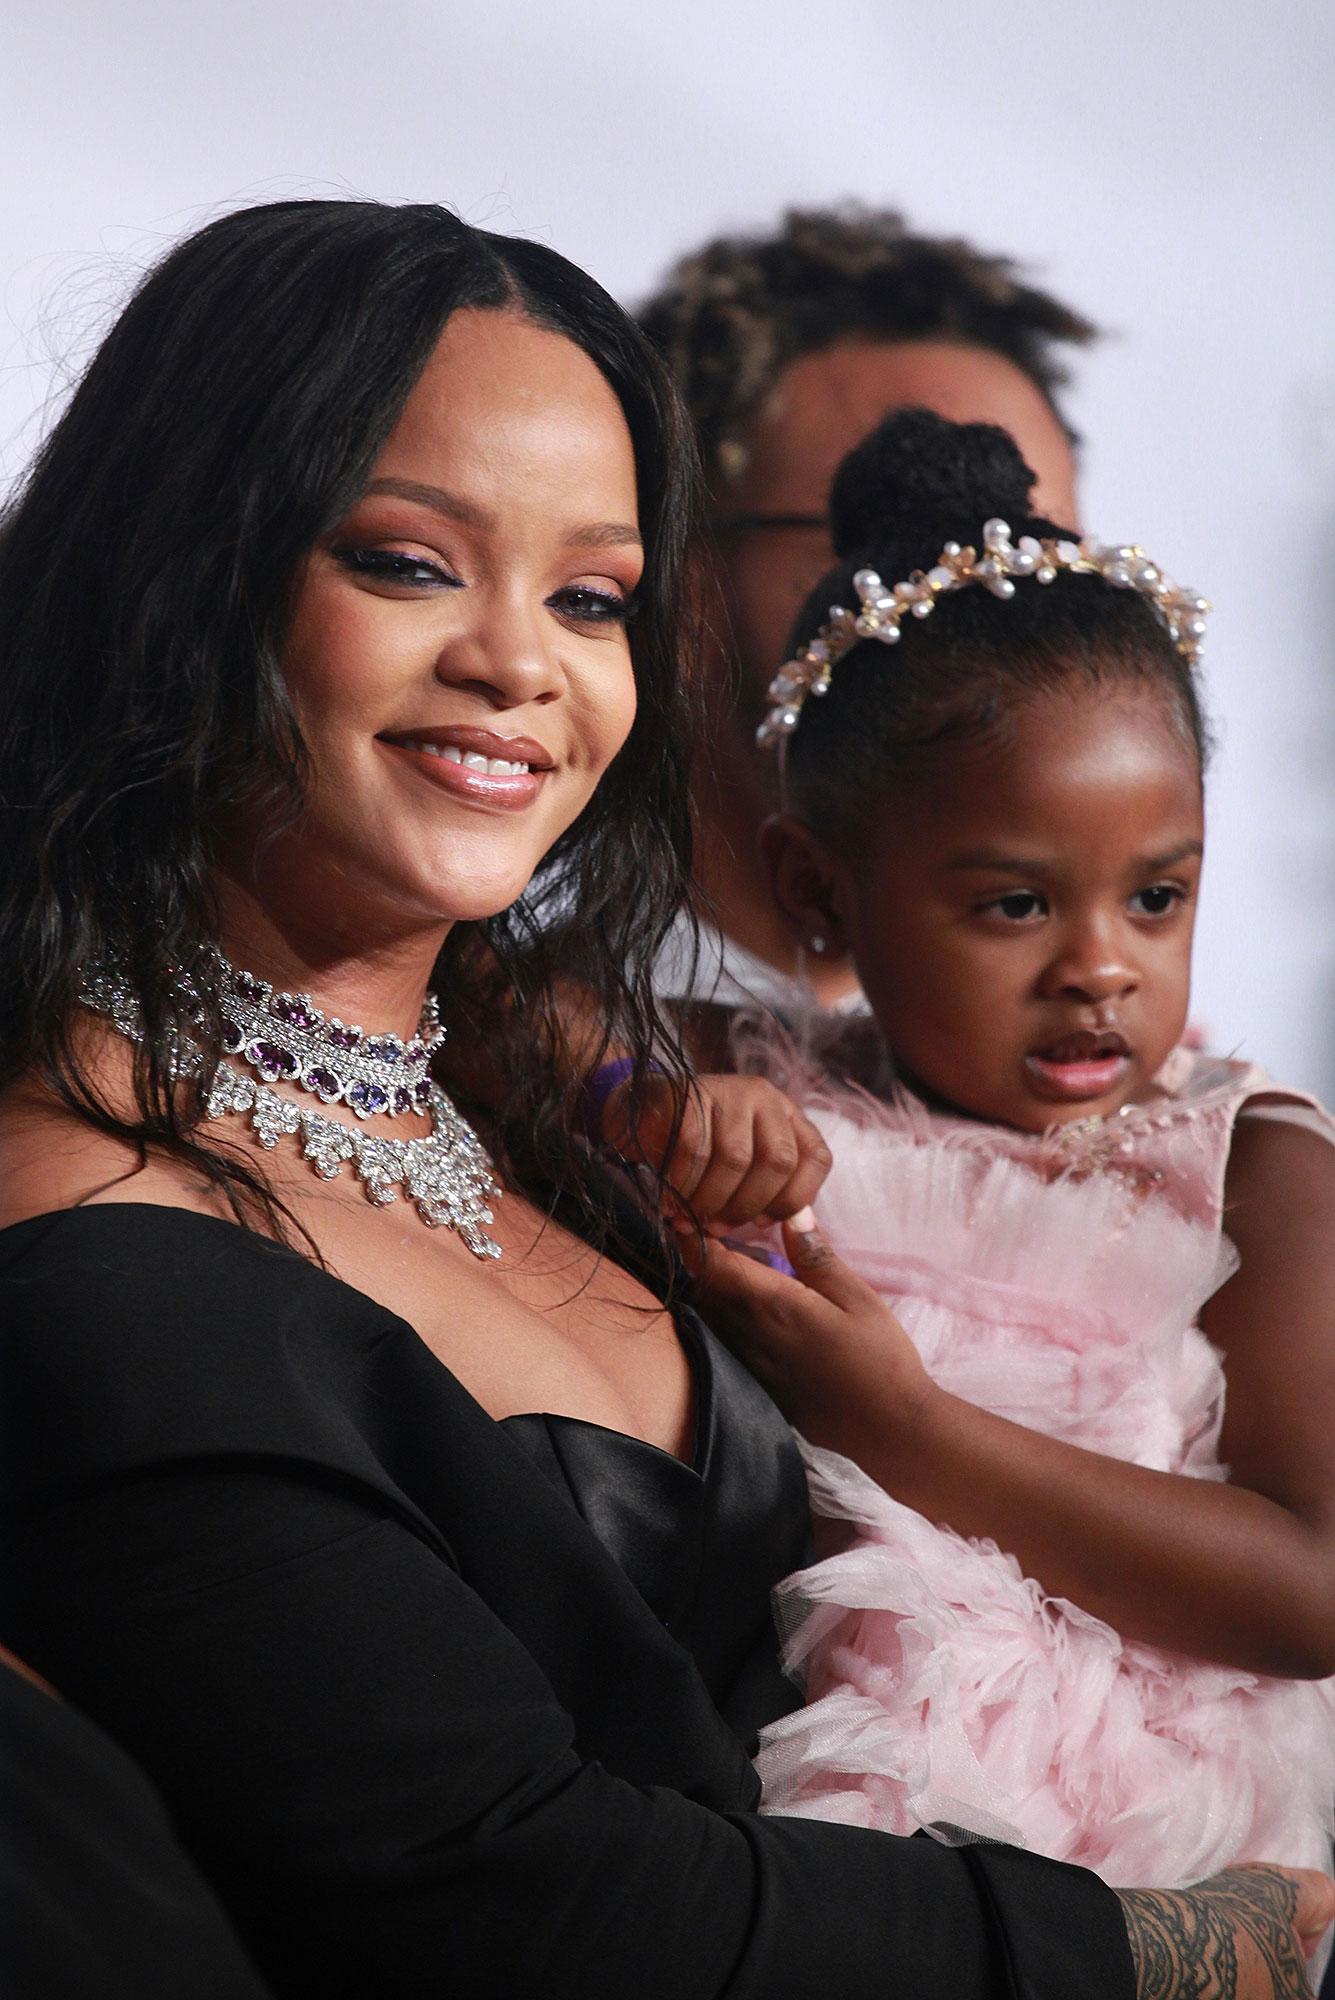 Rihanna's Quotes About Pregnancy, Wanting Kids Through the Years | Us Weekly